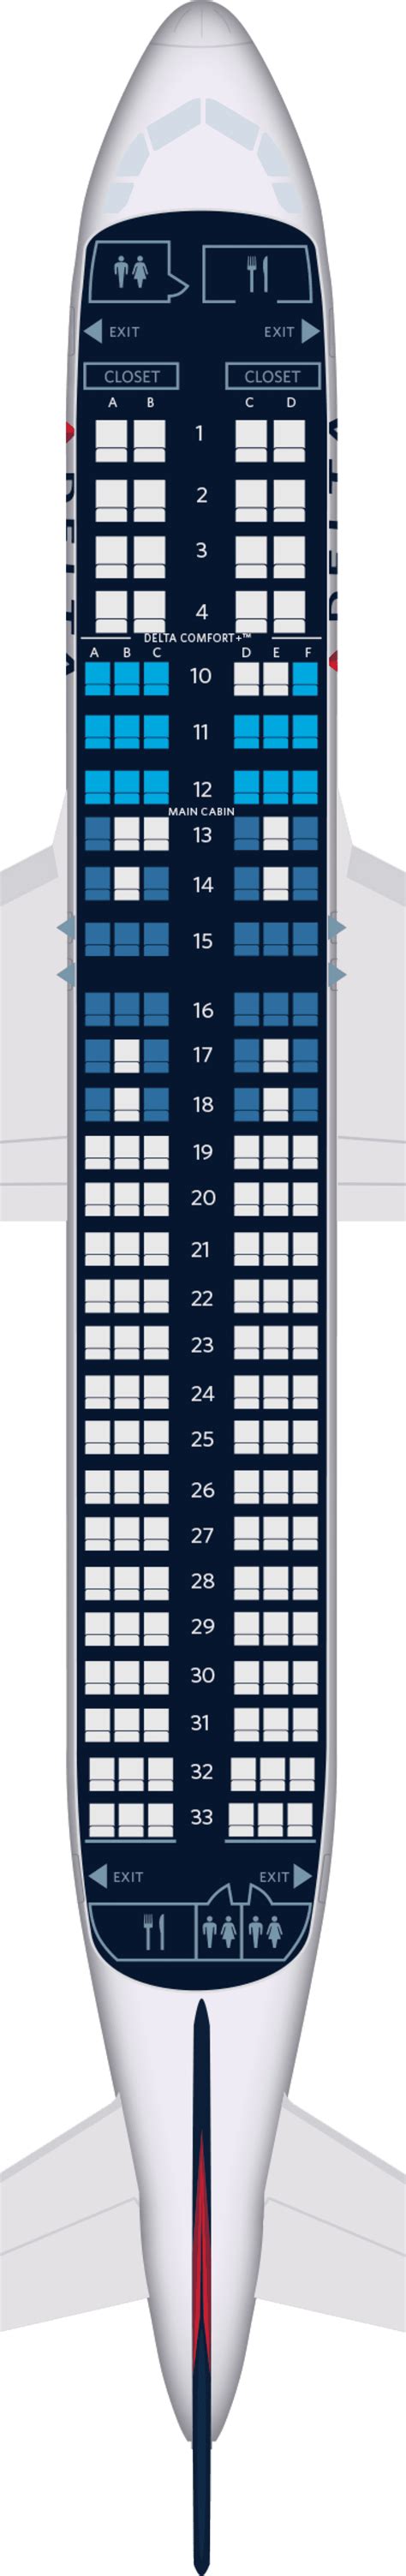 Airbus 320 seat plan. Economy. Seats 174. Pitch 29". Width 18". Recline 3". Travelers aboard PLAY's Airbus A320-200neo V.2 in economy class can expect a blend of affordability and essential amenities. With a capacity of 174 seats, it offers a selection of entertainment and basic comforts. The crew remains attentive, ensuring a satisfactory flight experience for all. 